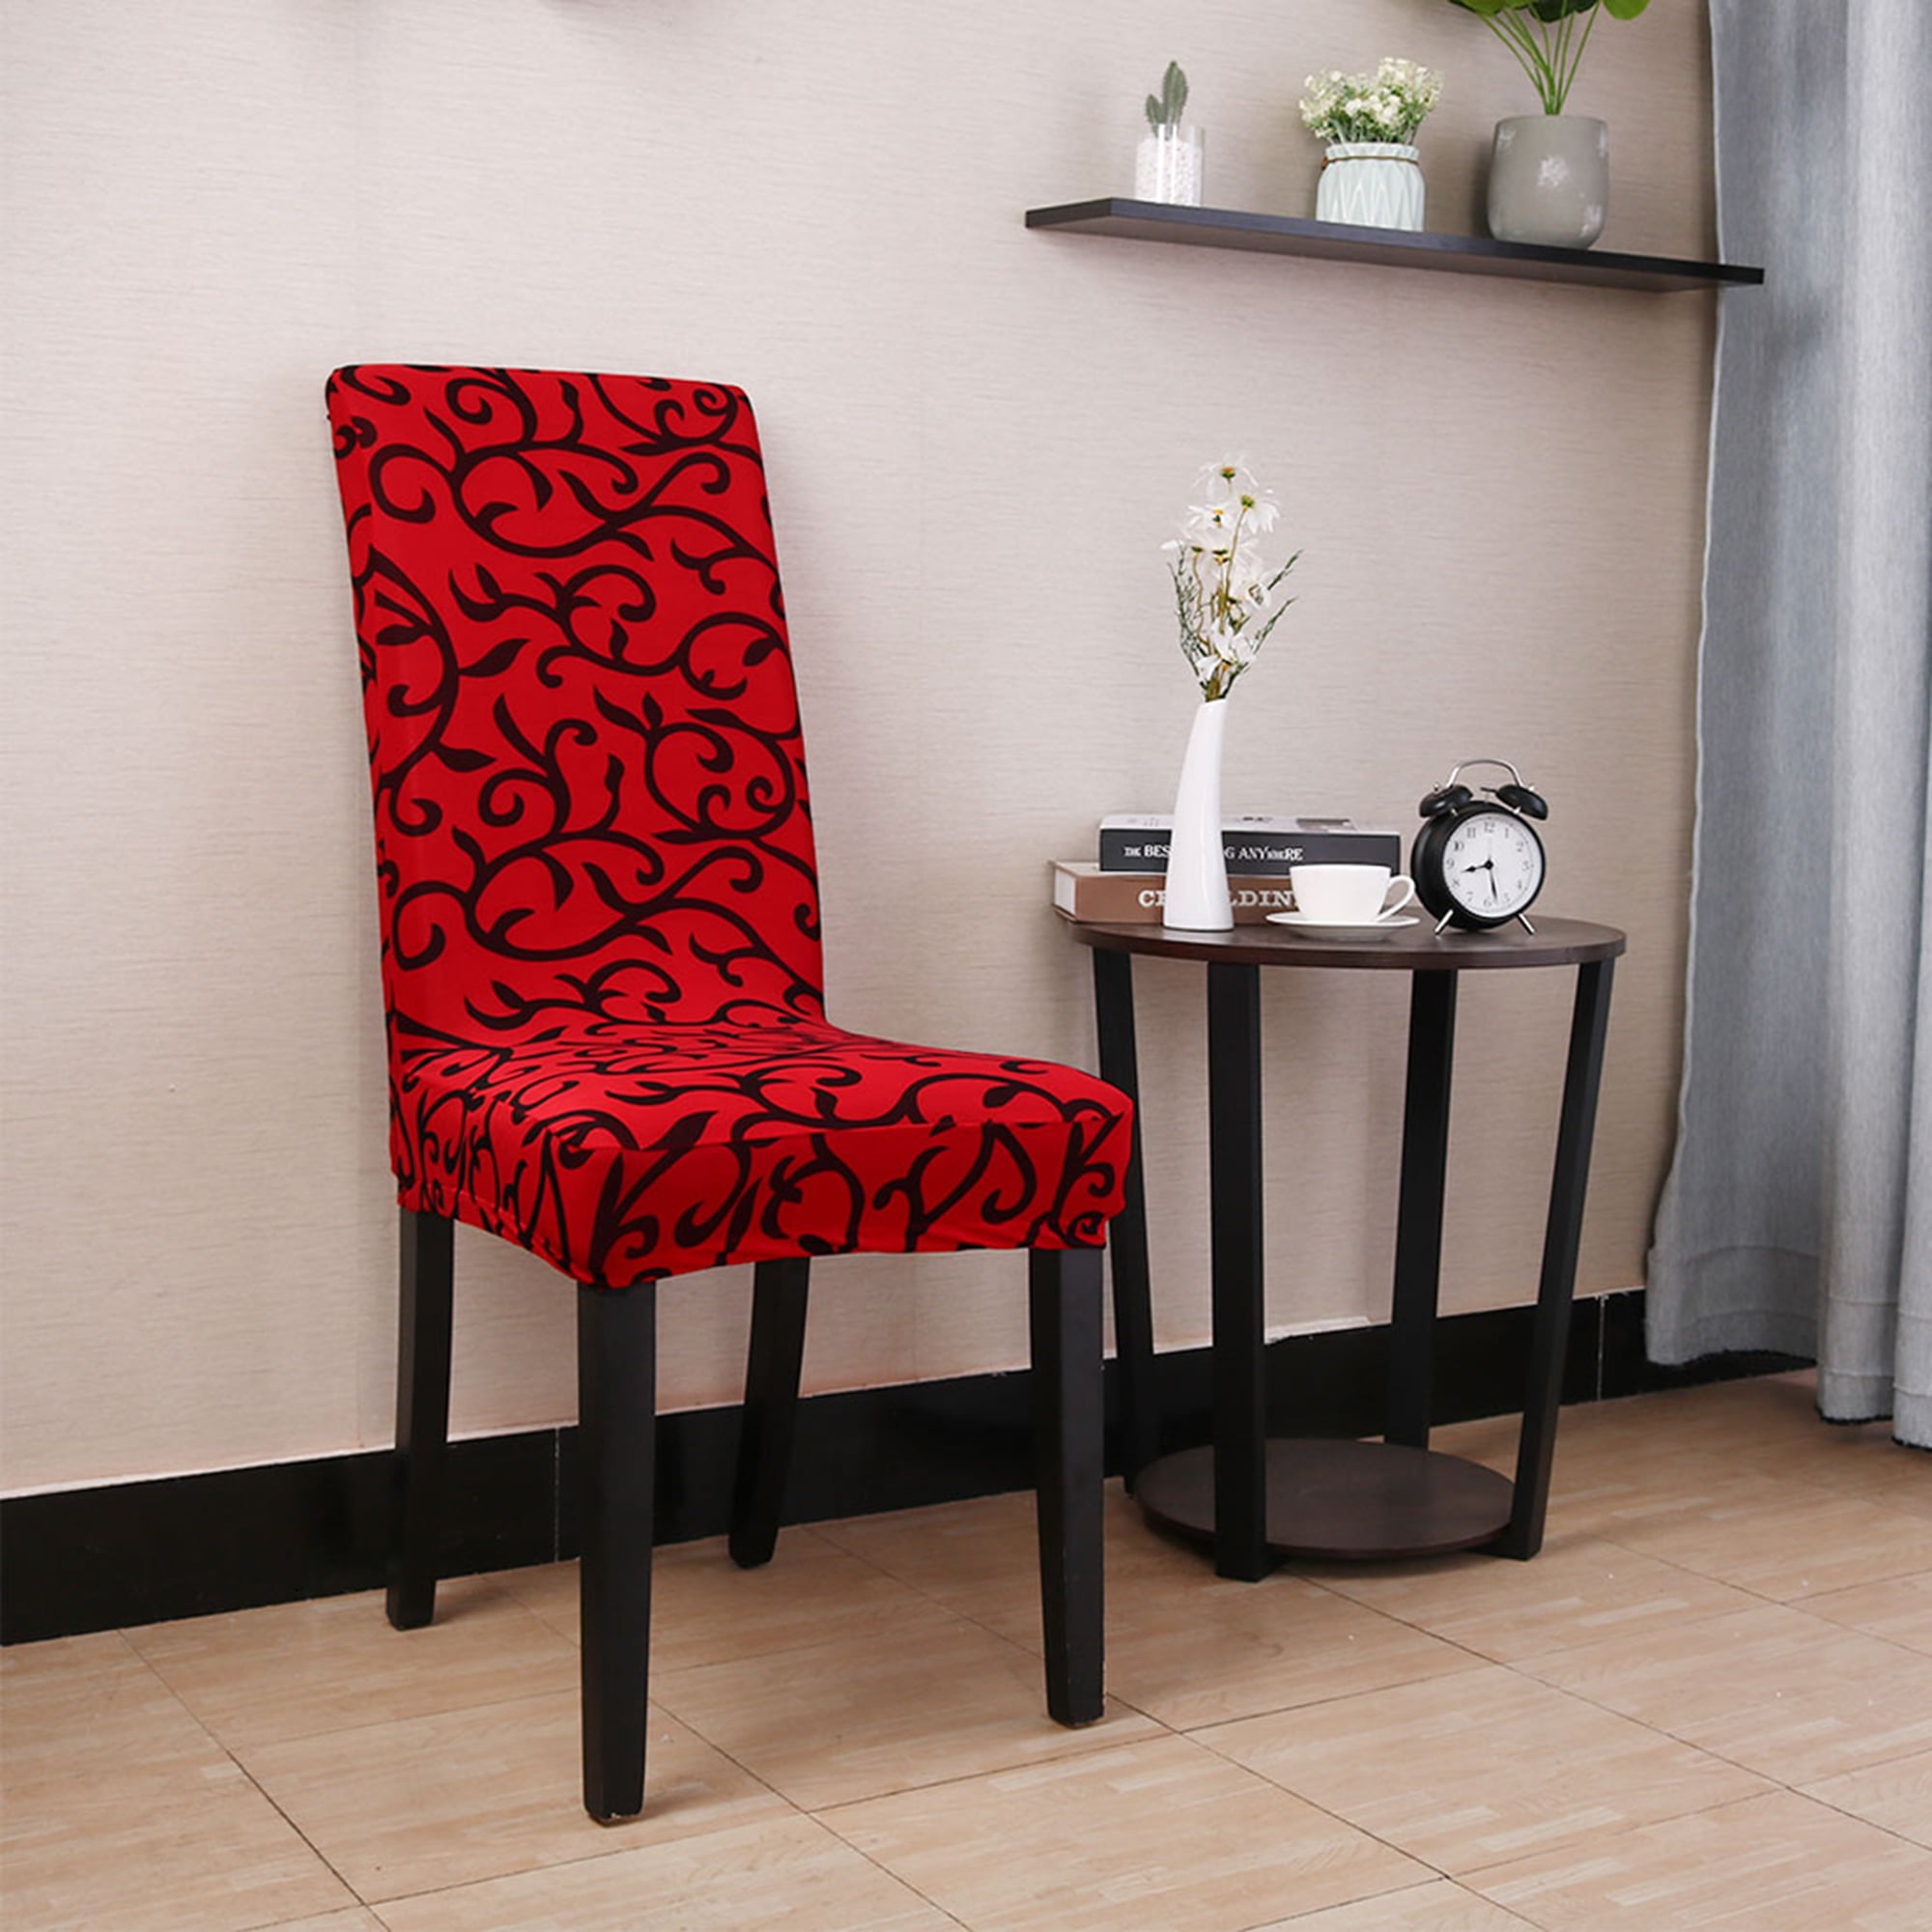 Minimalist Spandex Chair Covers Walmart for Large Space